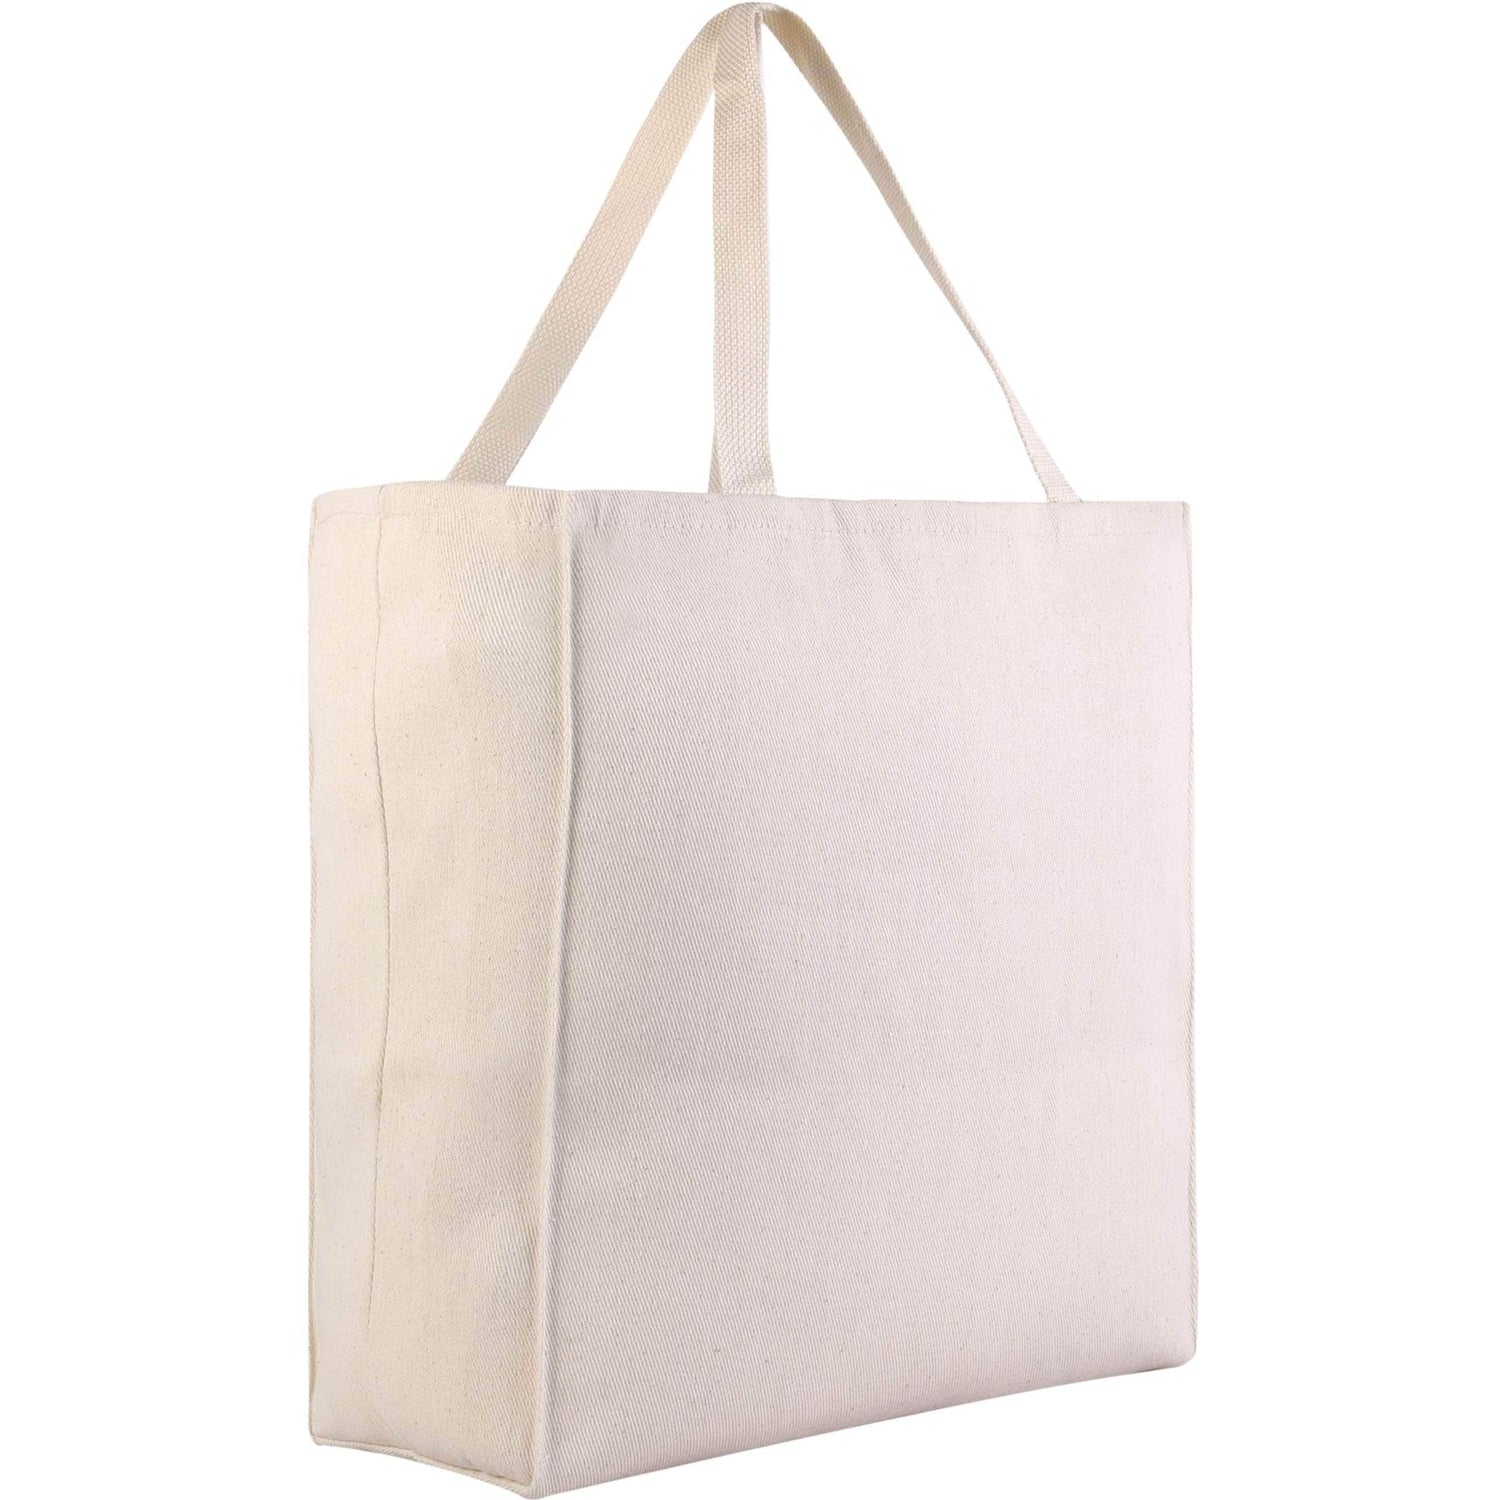 Reusable Shopping Bags | Cotton Twill Tote Bags & Grocery Bags in Bulk – BagzDepot™